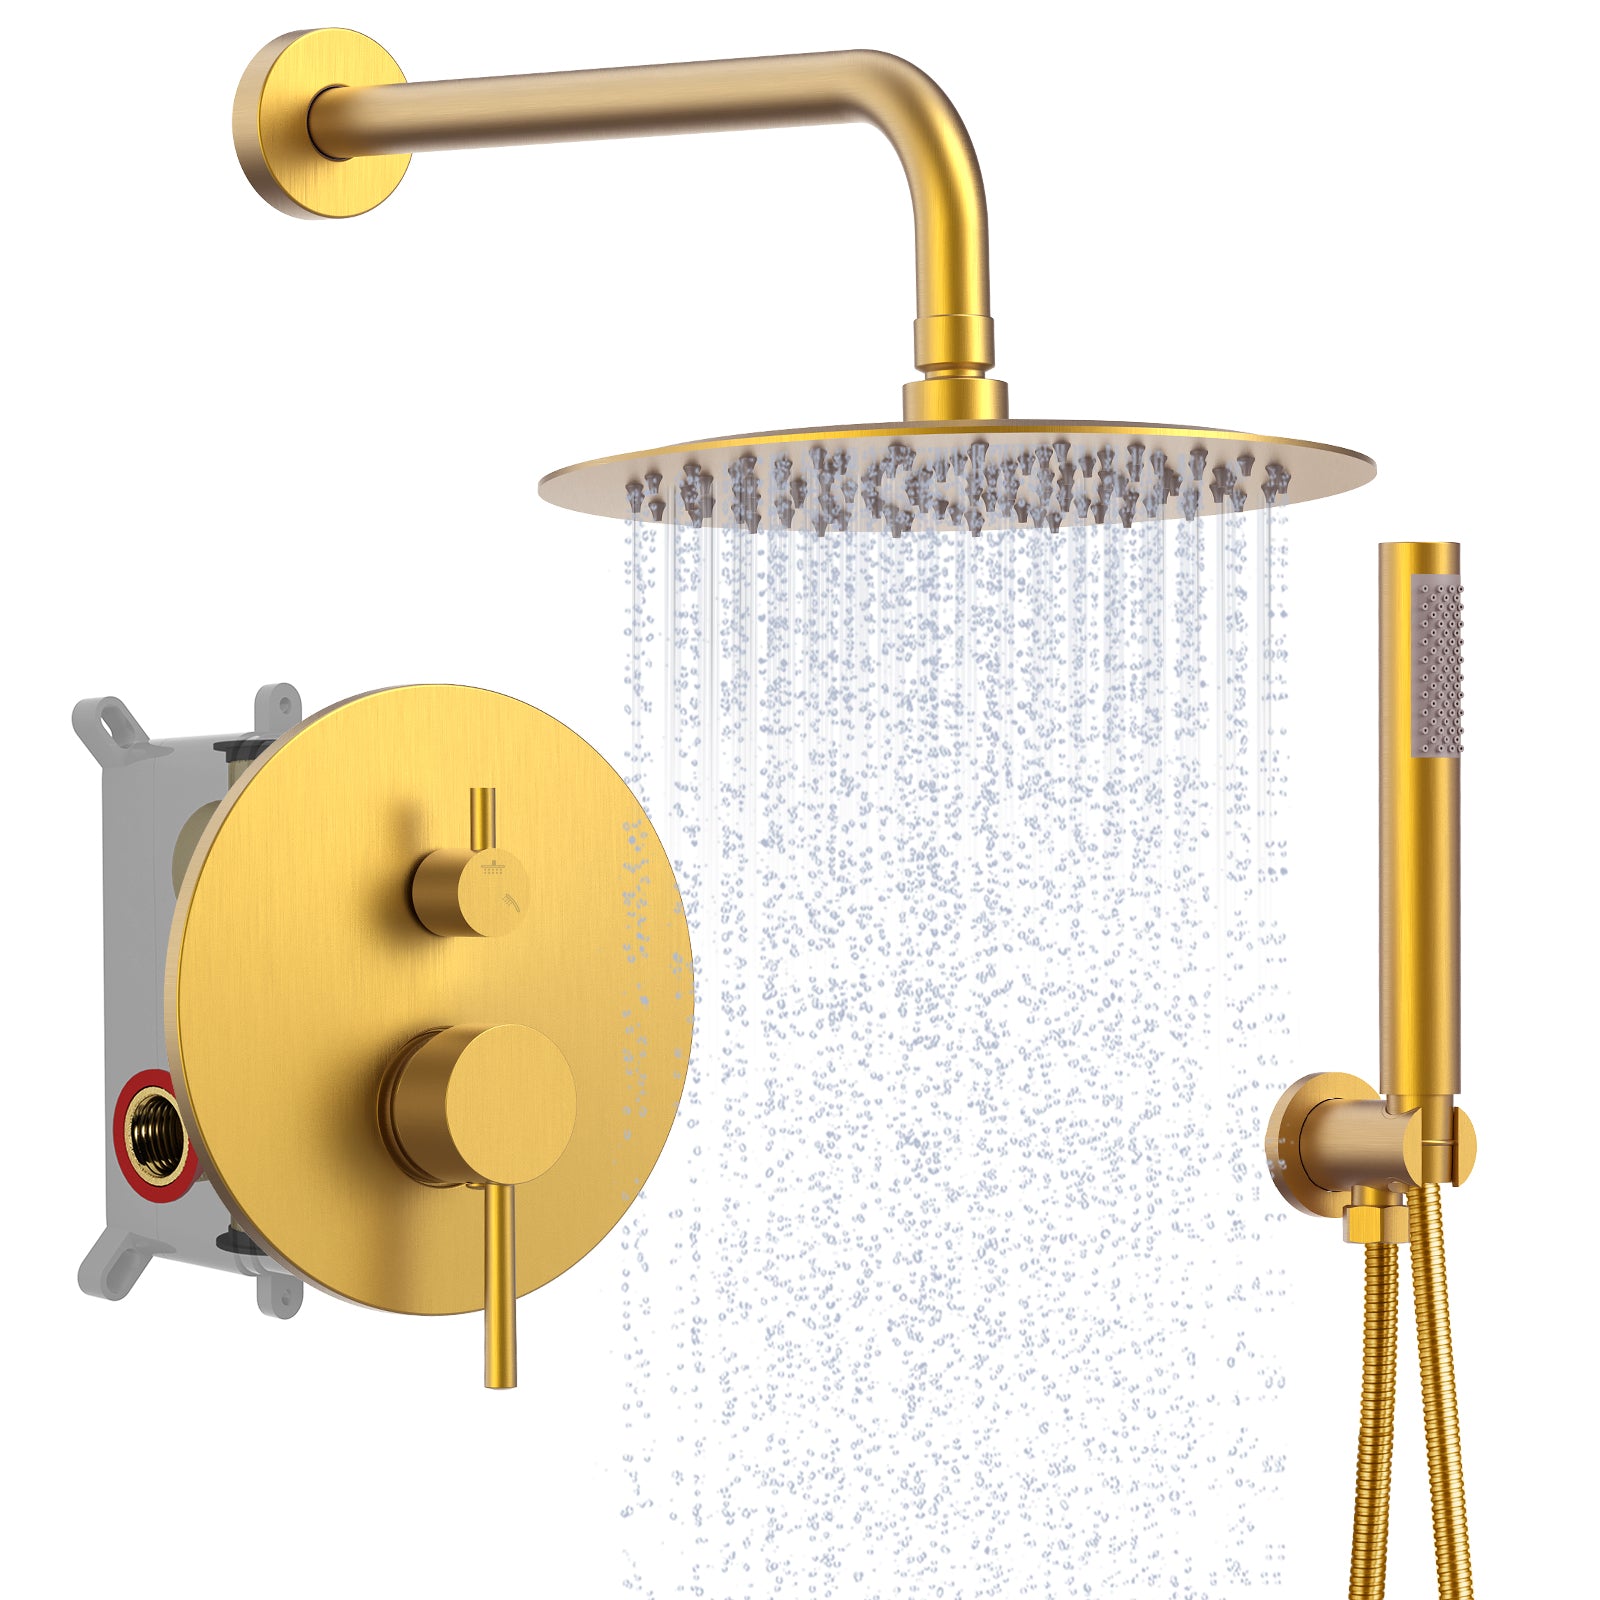 M6610GNI-10BL EVERSTEIN Shower Head Faucet System Combo Set - Rainfall Bathroom Shower Faucet Kit with Handheld Spray Hose, High-Pressure Luxury Wall Mount Shower Fixture Filter Accessories Gifts Rough-in Valve Body & Trim